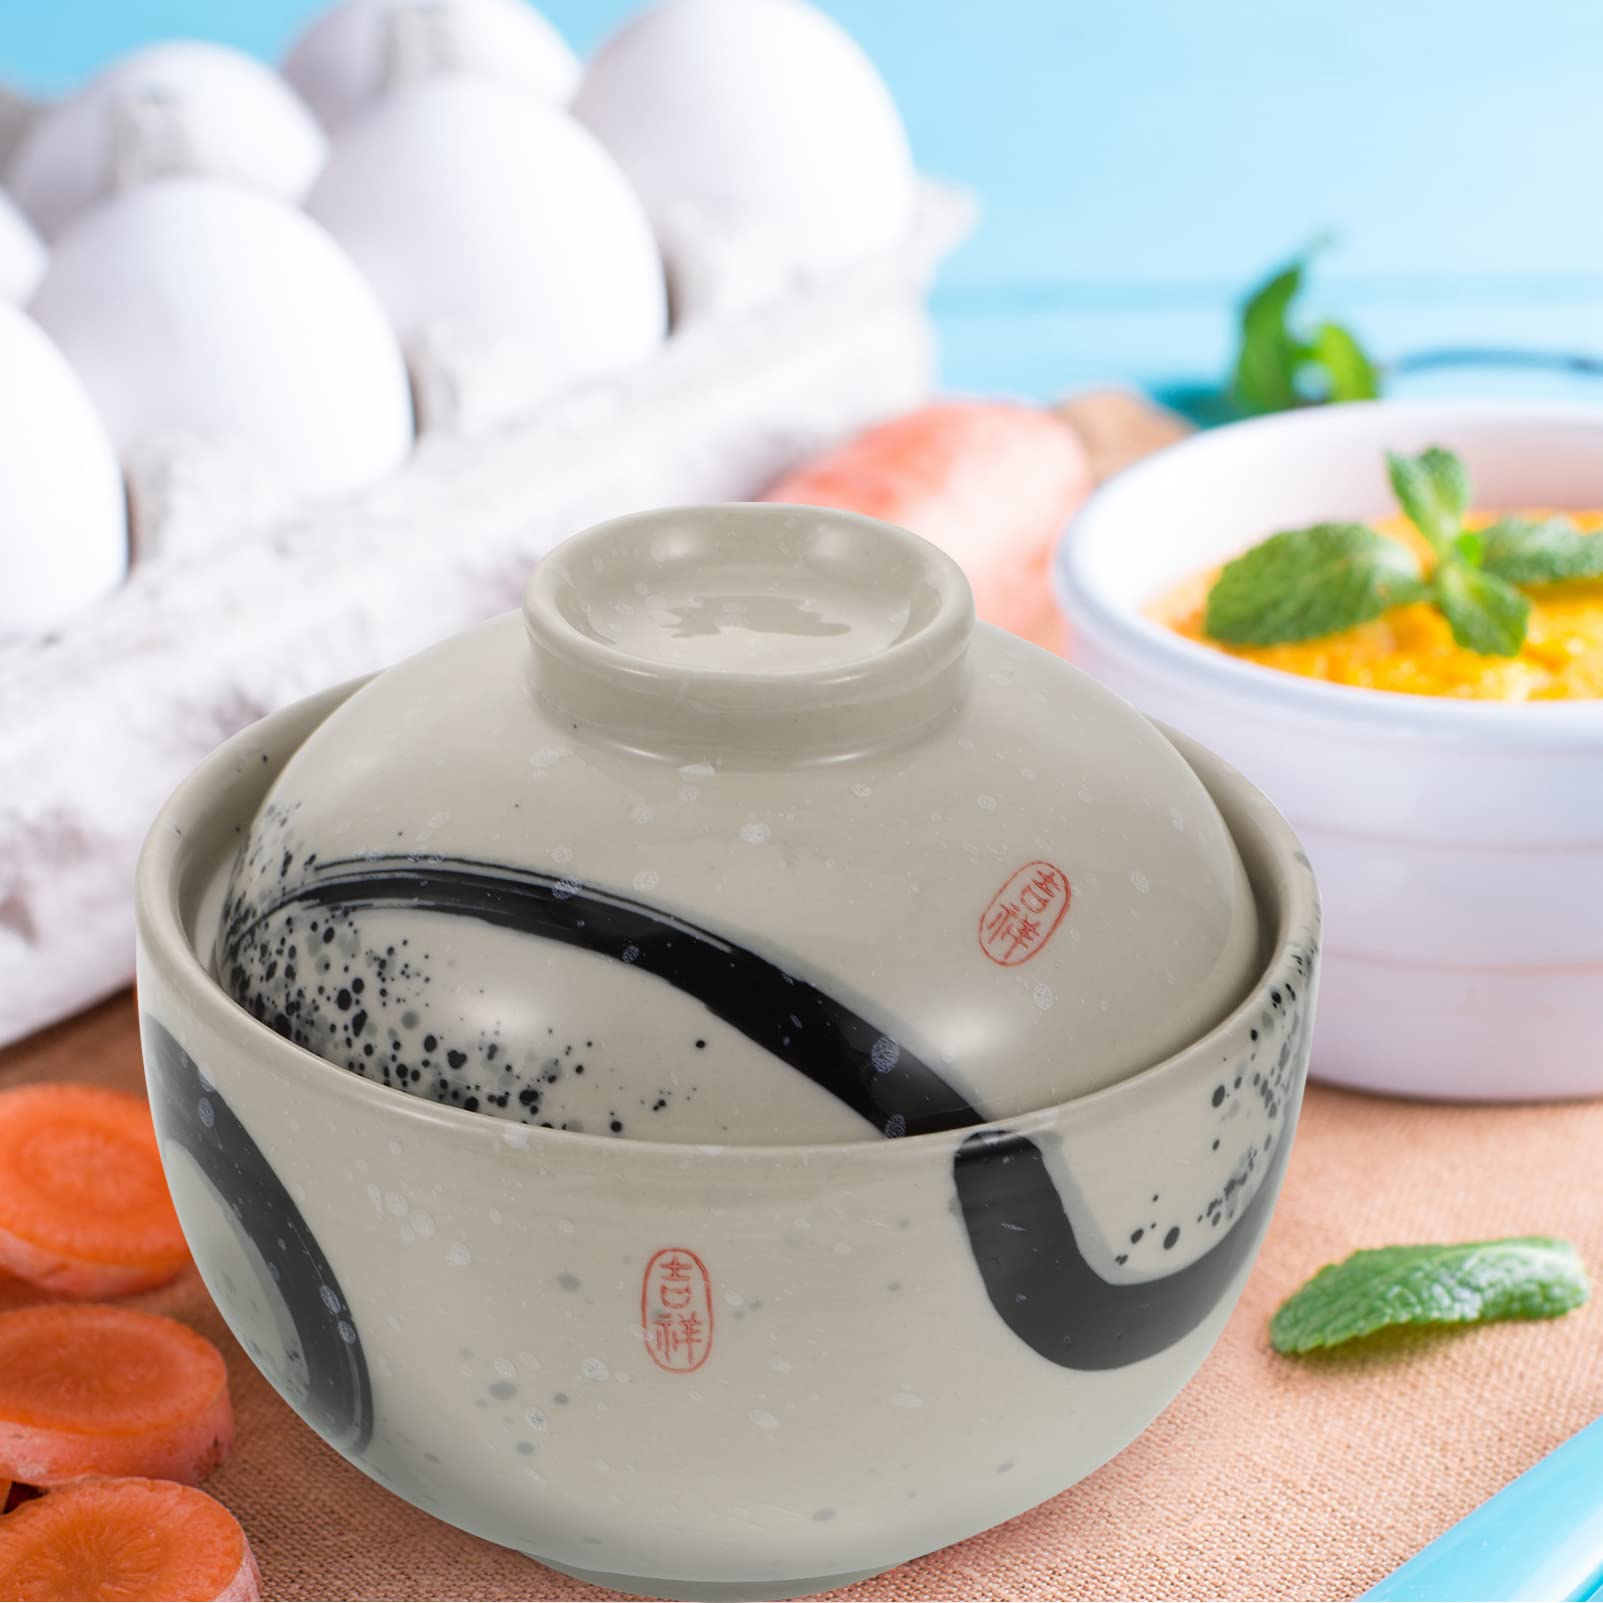 Yardwe Ceramic Bowl with Lid Traditional Japanese Style Soup Bowl Ramen Noodle Soup Rice Bowl with Lid (White)